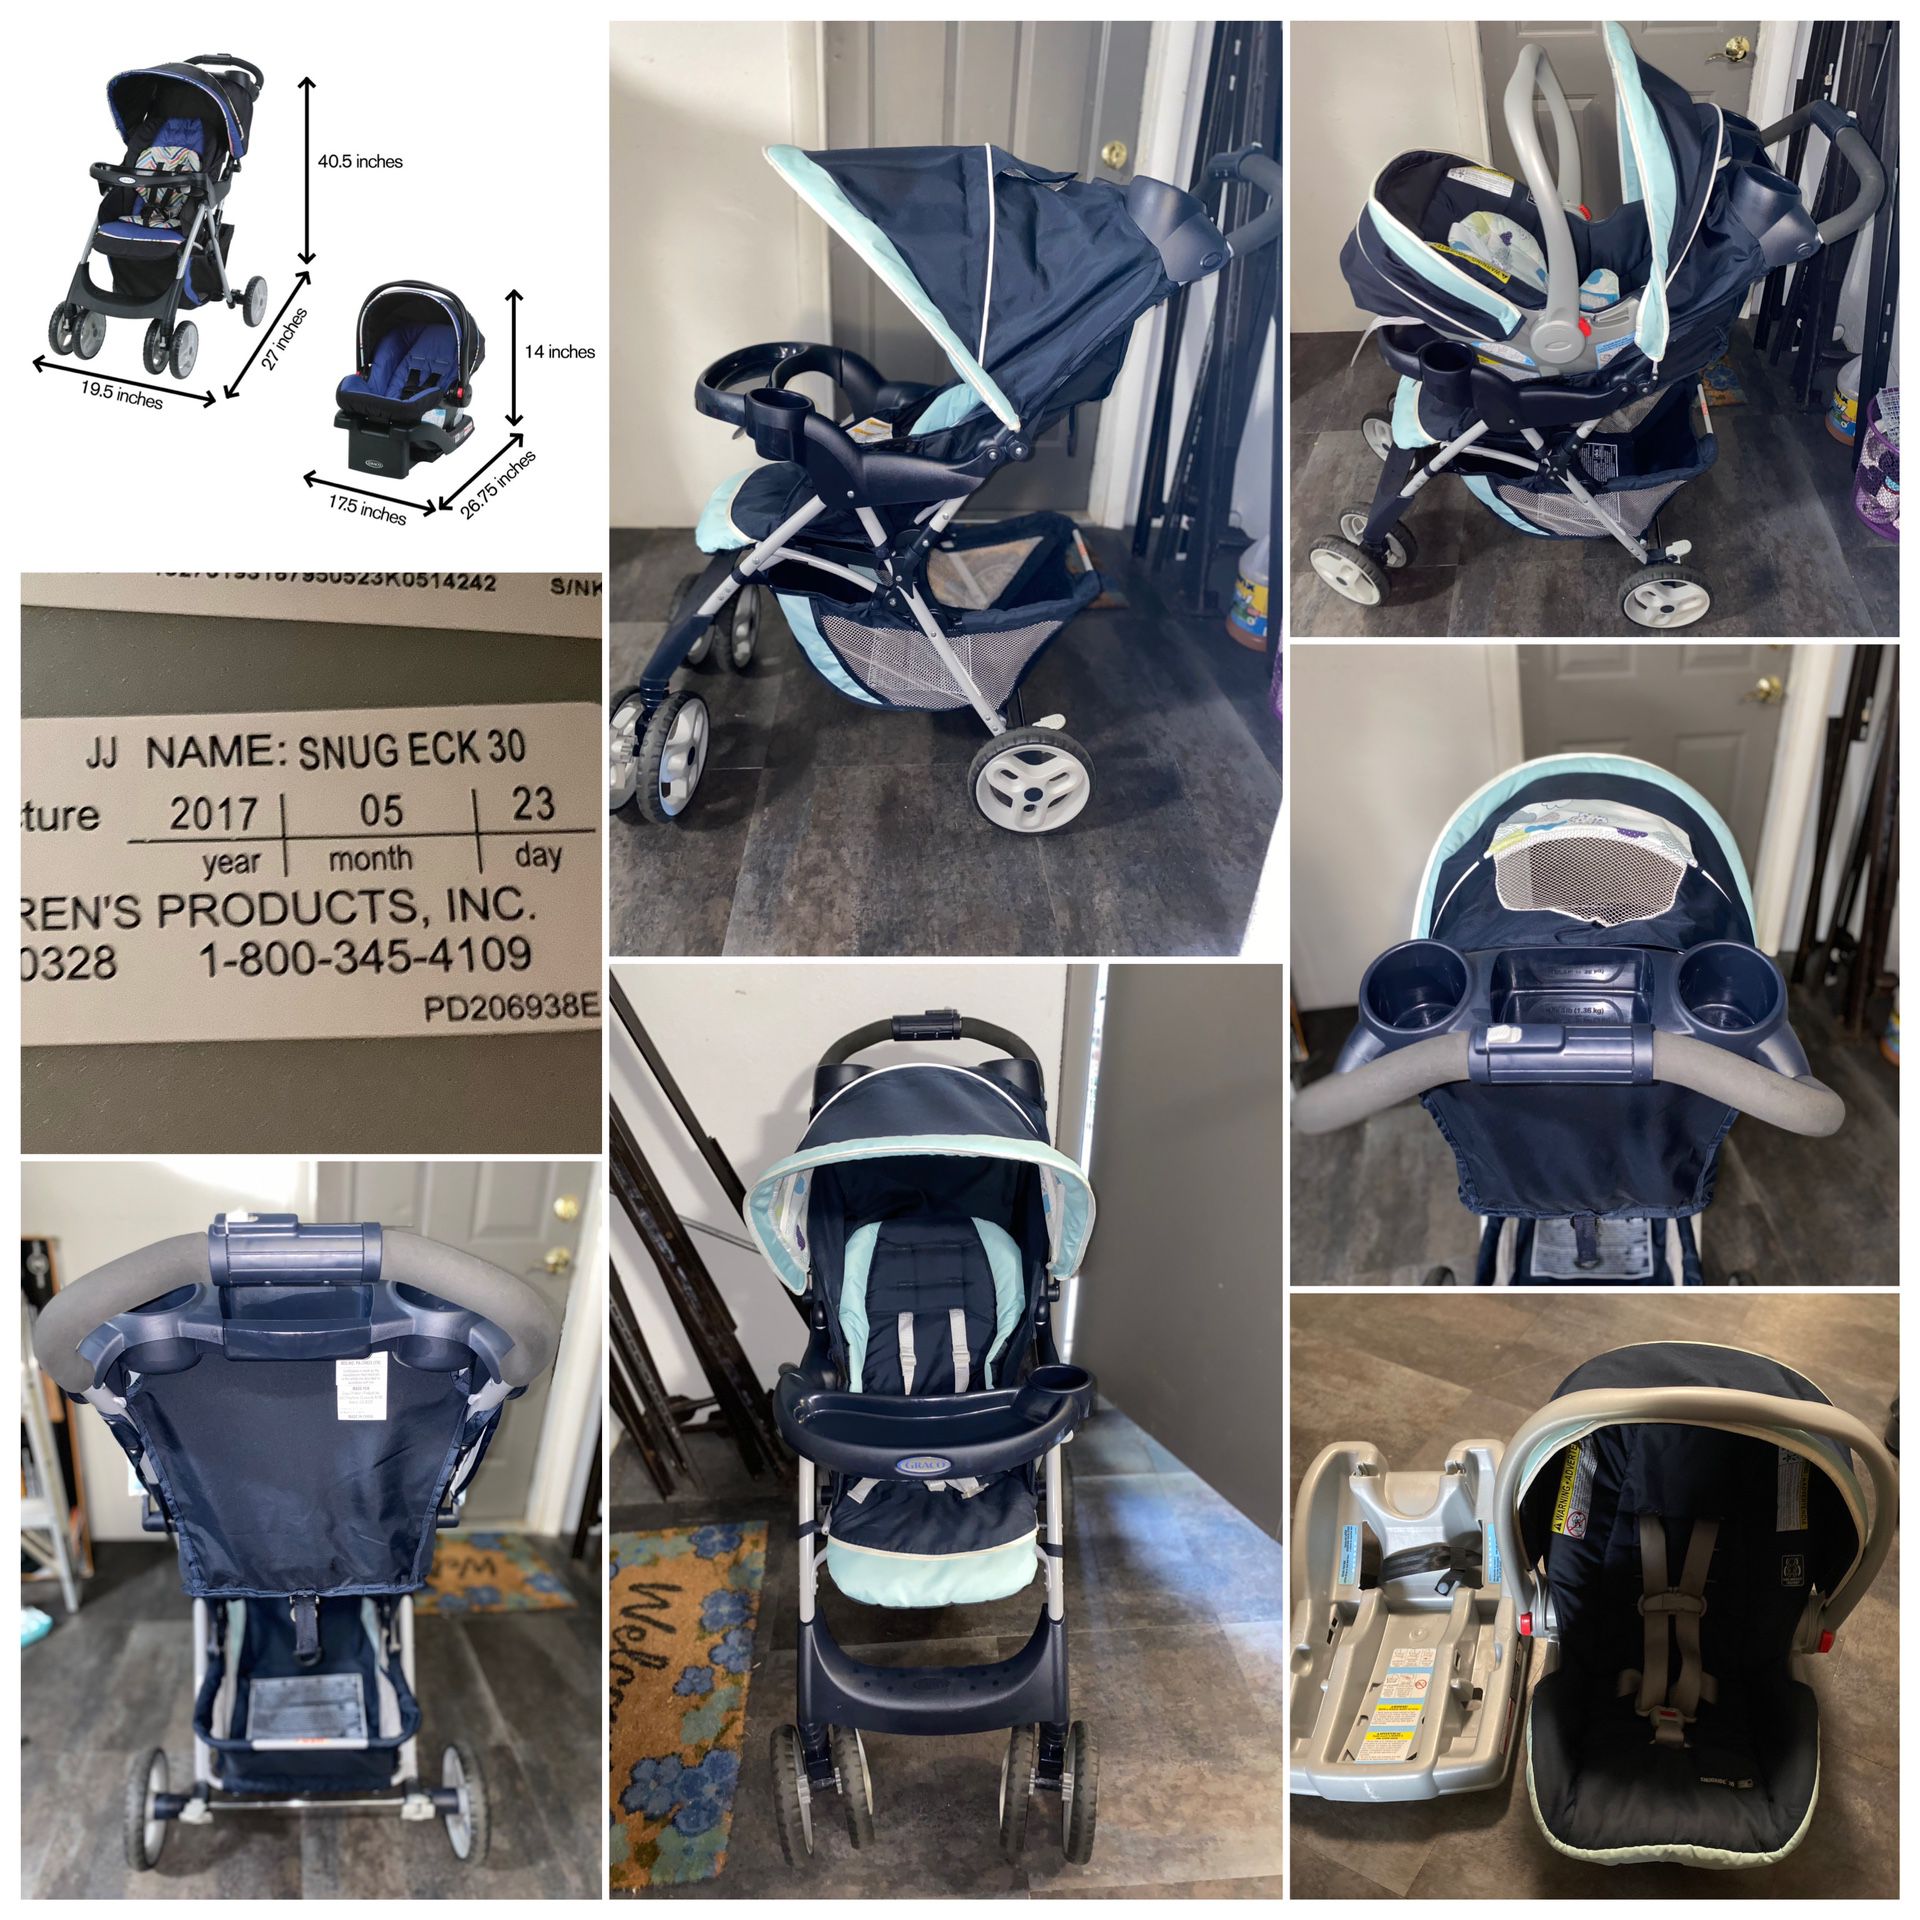 Graco comfy cruiser click connect travel system